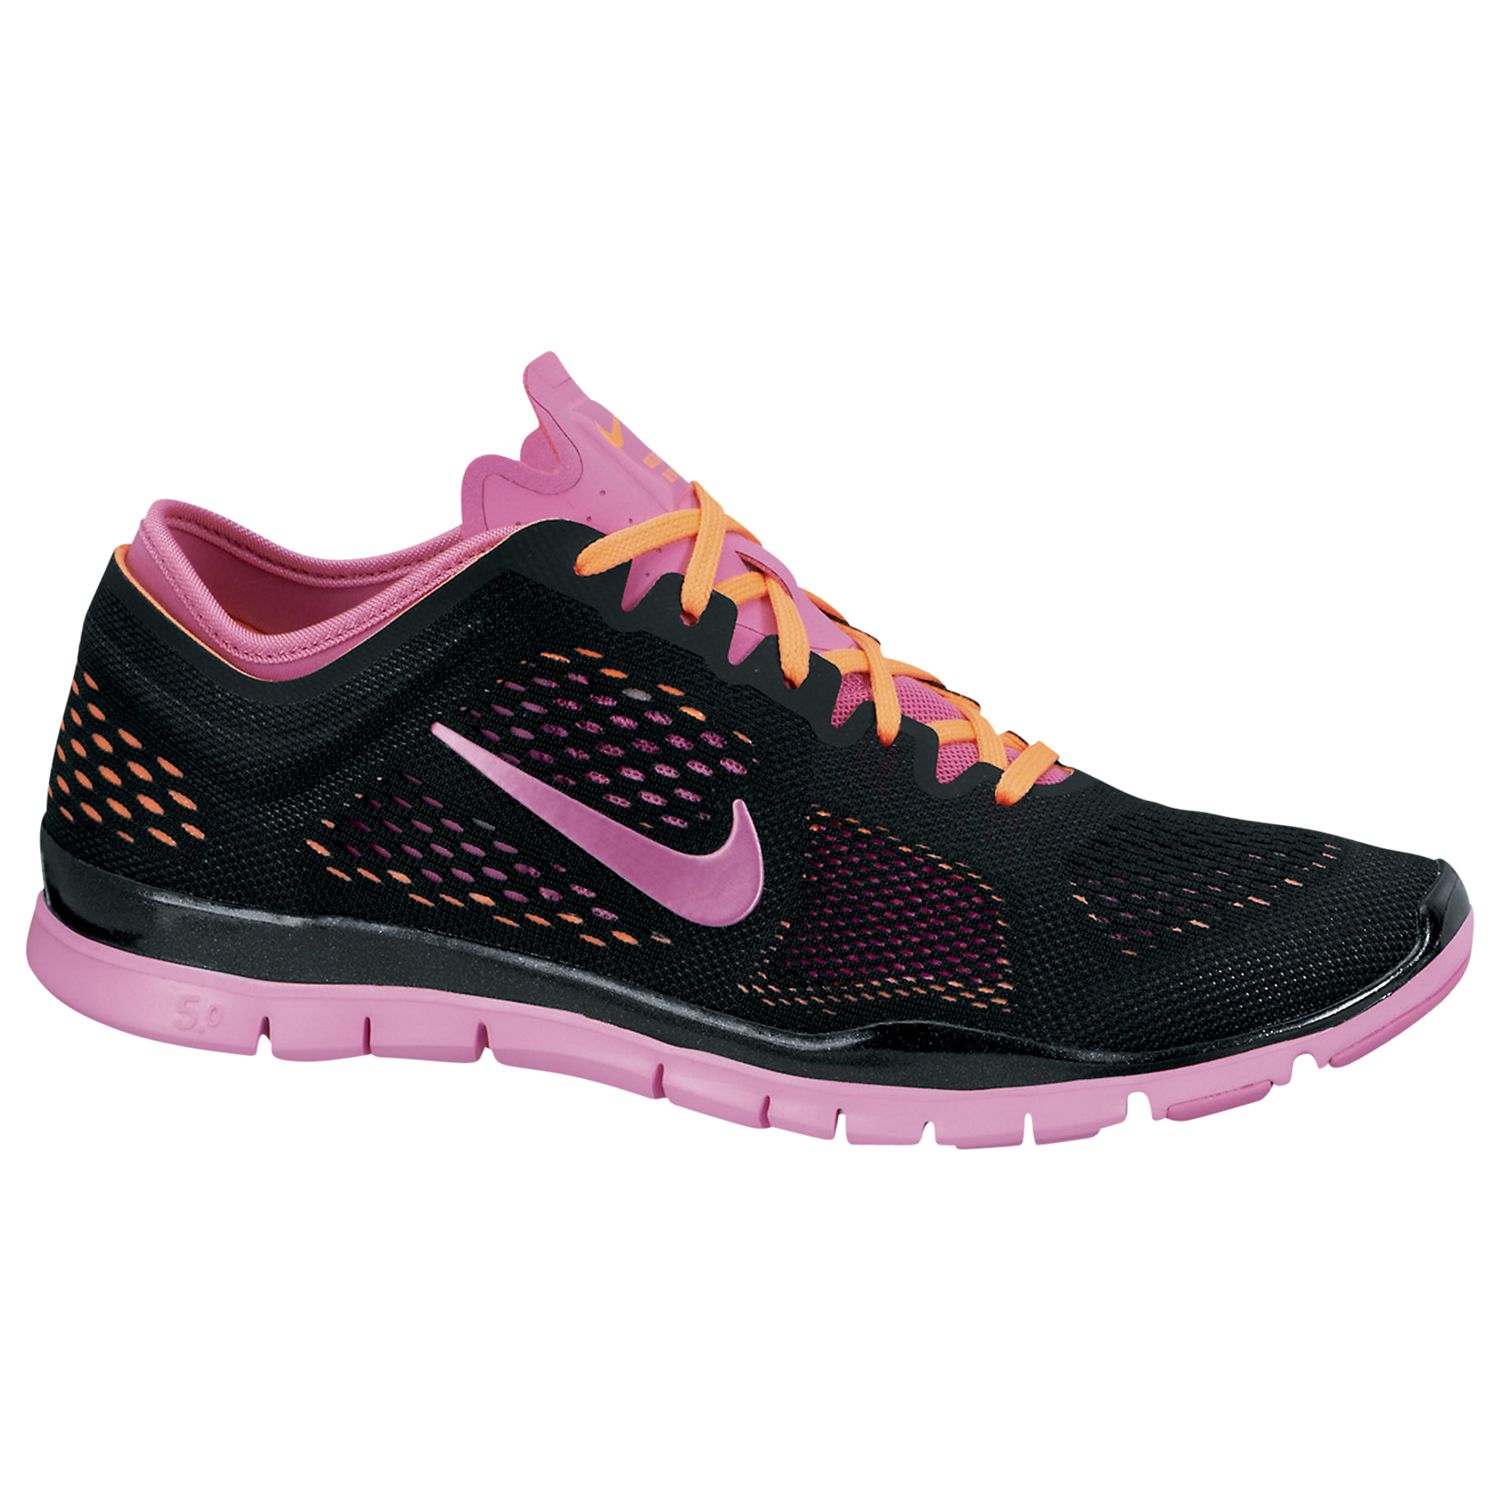 Nike Women's Free 5.0 TR Fit 4 Cross Trainers at John Lewis & Partners